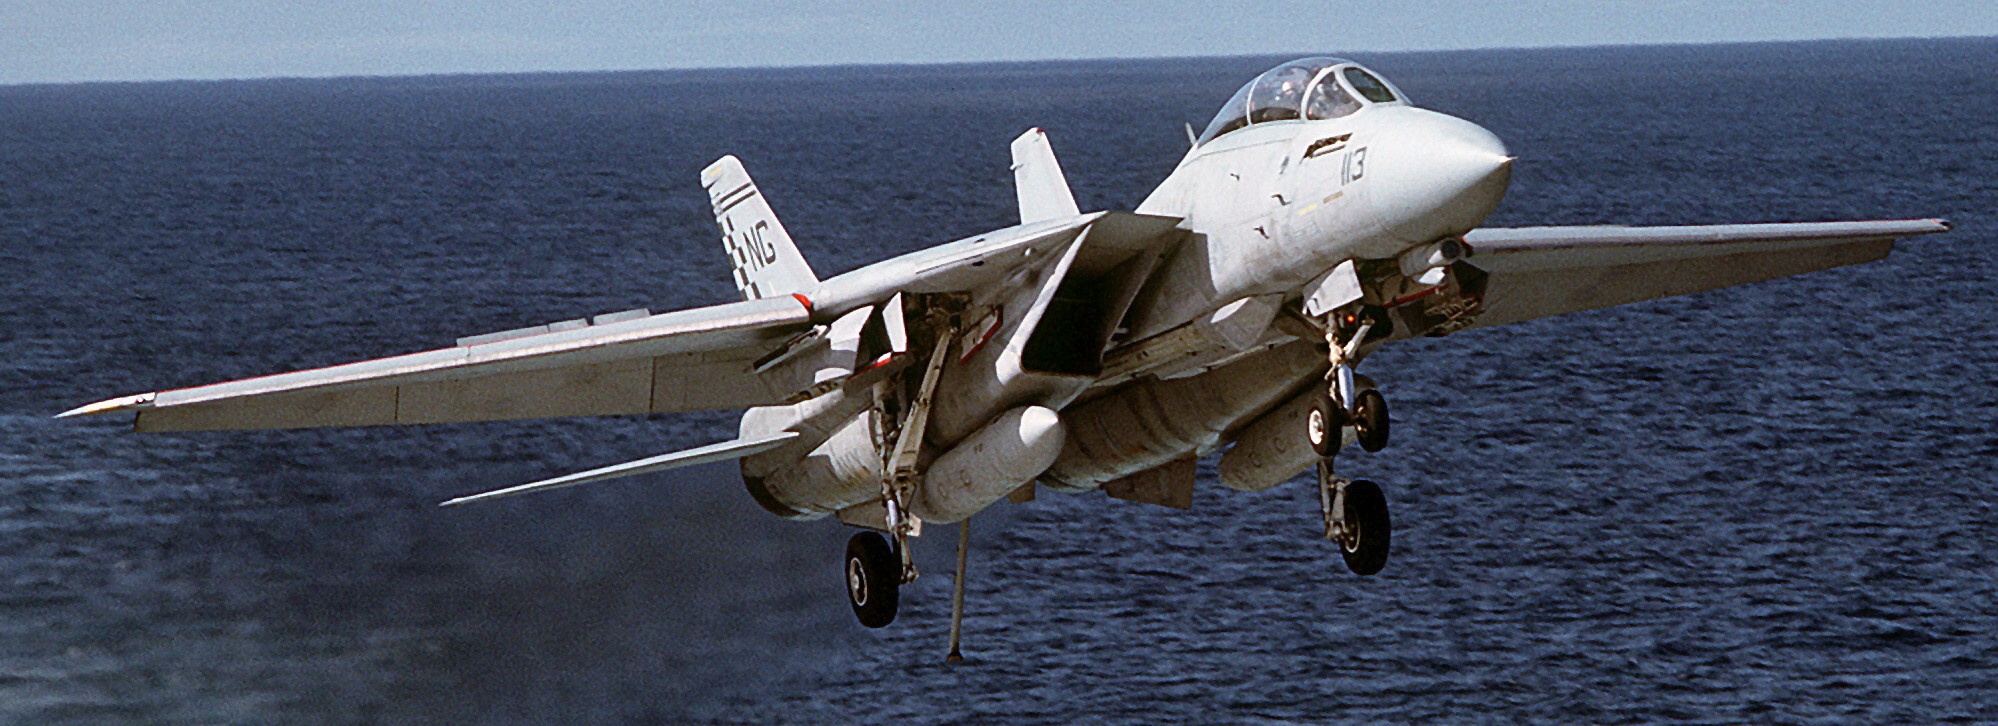 vf-211 fighting checkmates fighter squadron f-14a tomcat us navy carrier air wing cvw-9 uss nimitz cvn-68 98